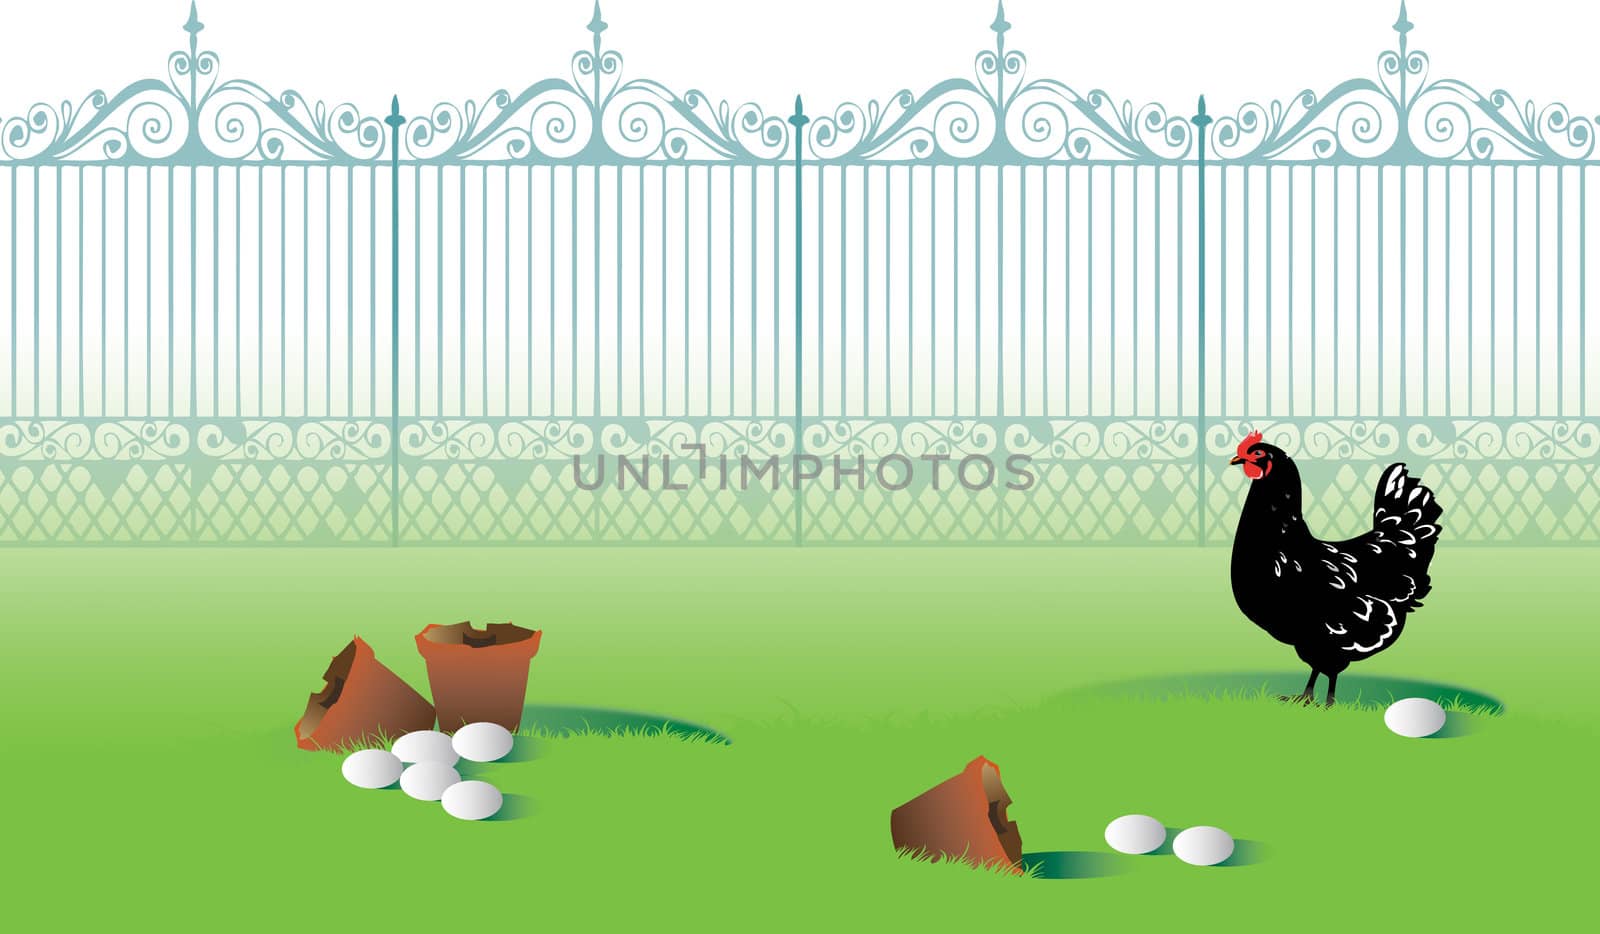 An illustration of a black and white chicken in a garden setting with broken plant pots and freshly laId white eggs. All set in front of a backdrop Of ornate garden gates. French in style, Easter in theme.